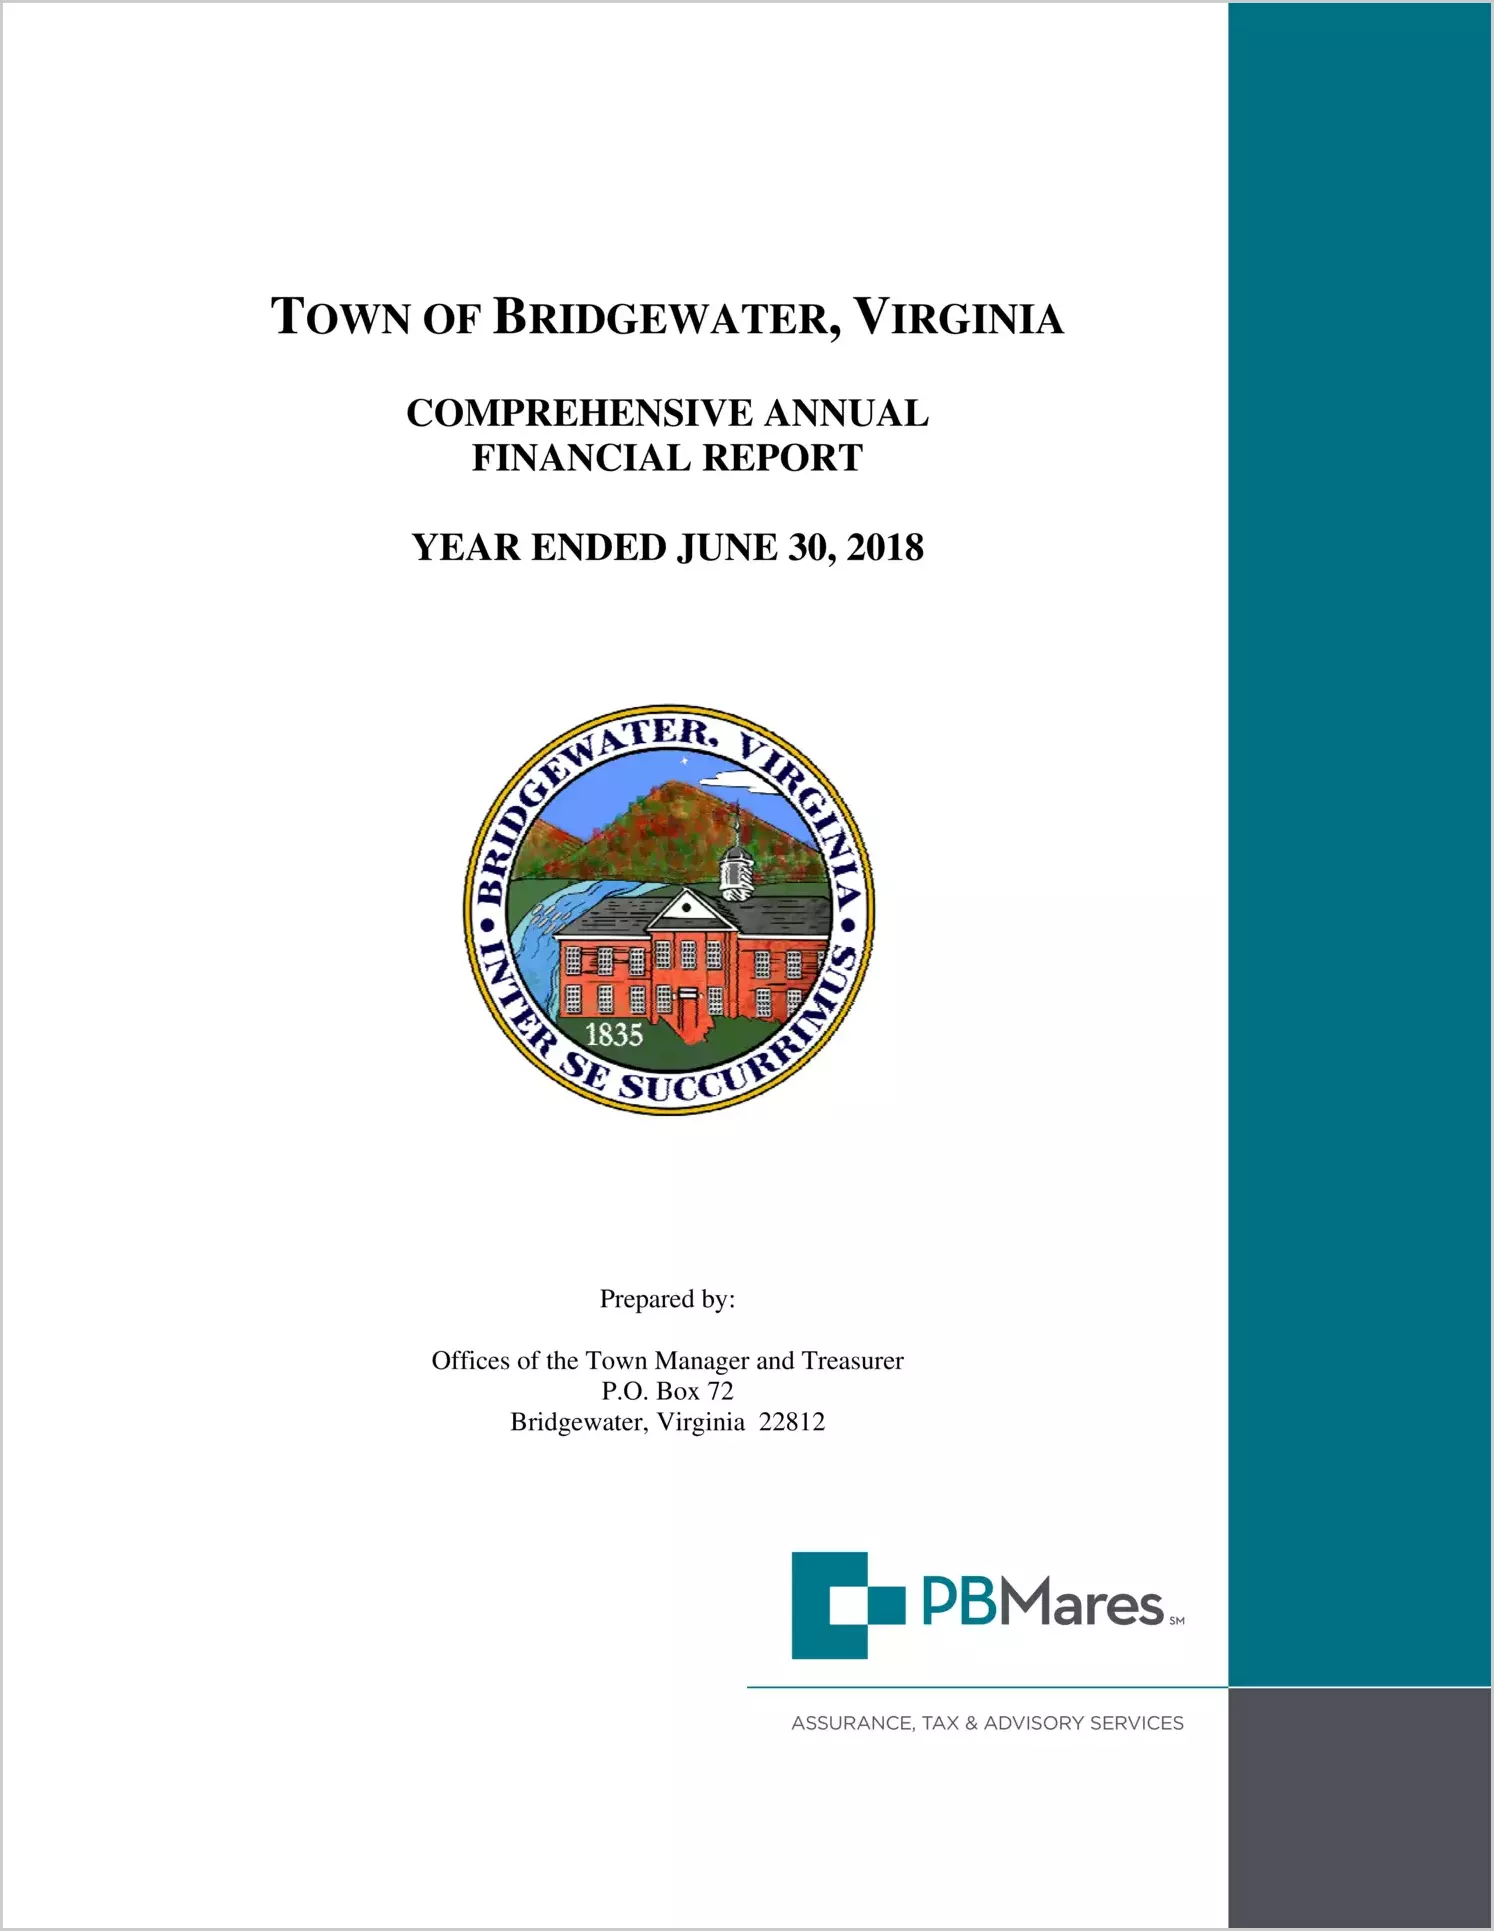 2018 Annual Financial Report for Town of Bridgewater